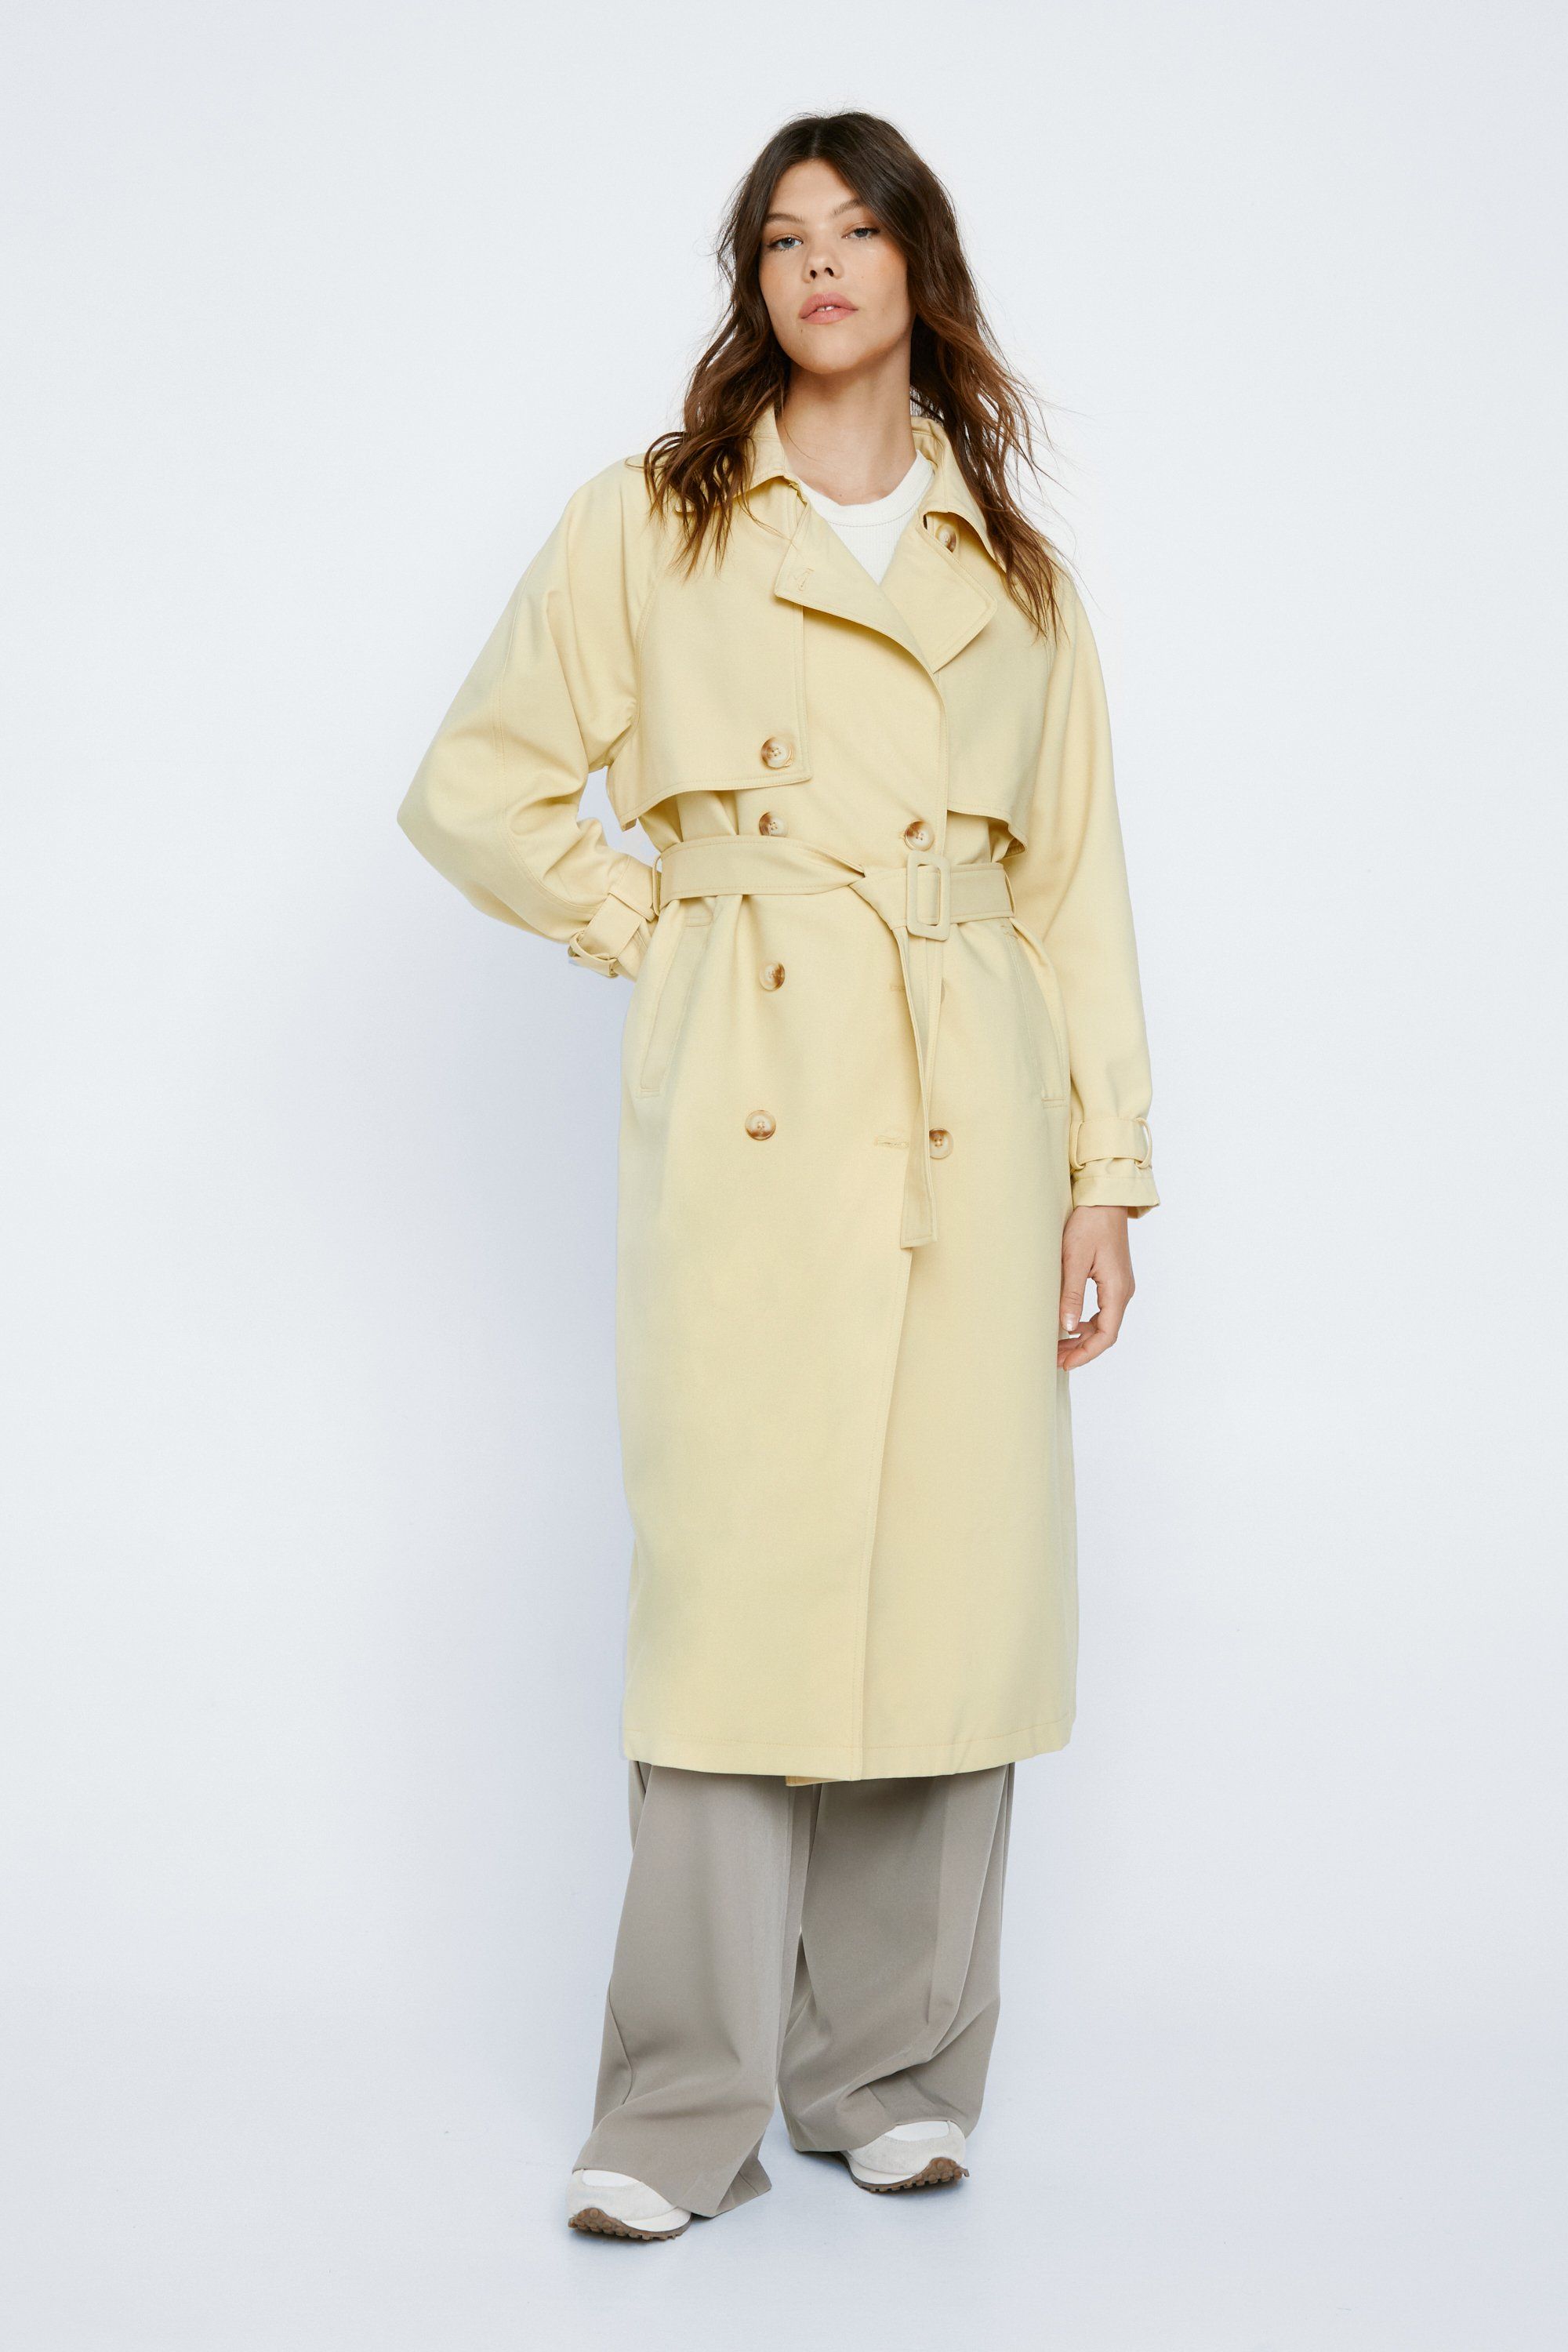 Twill double breasted trench coat, now Nasty Gal